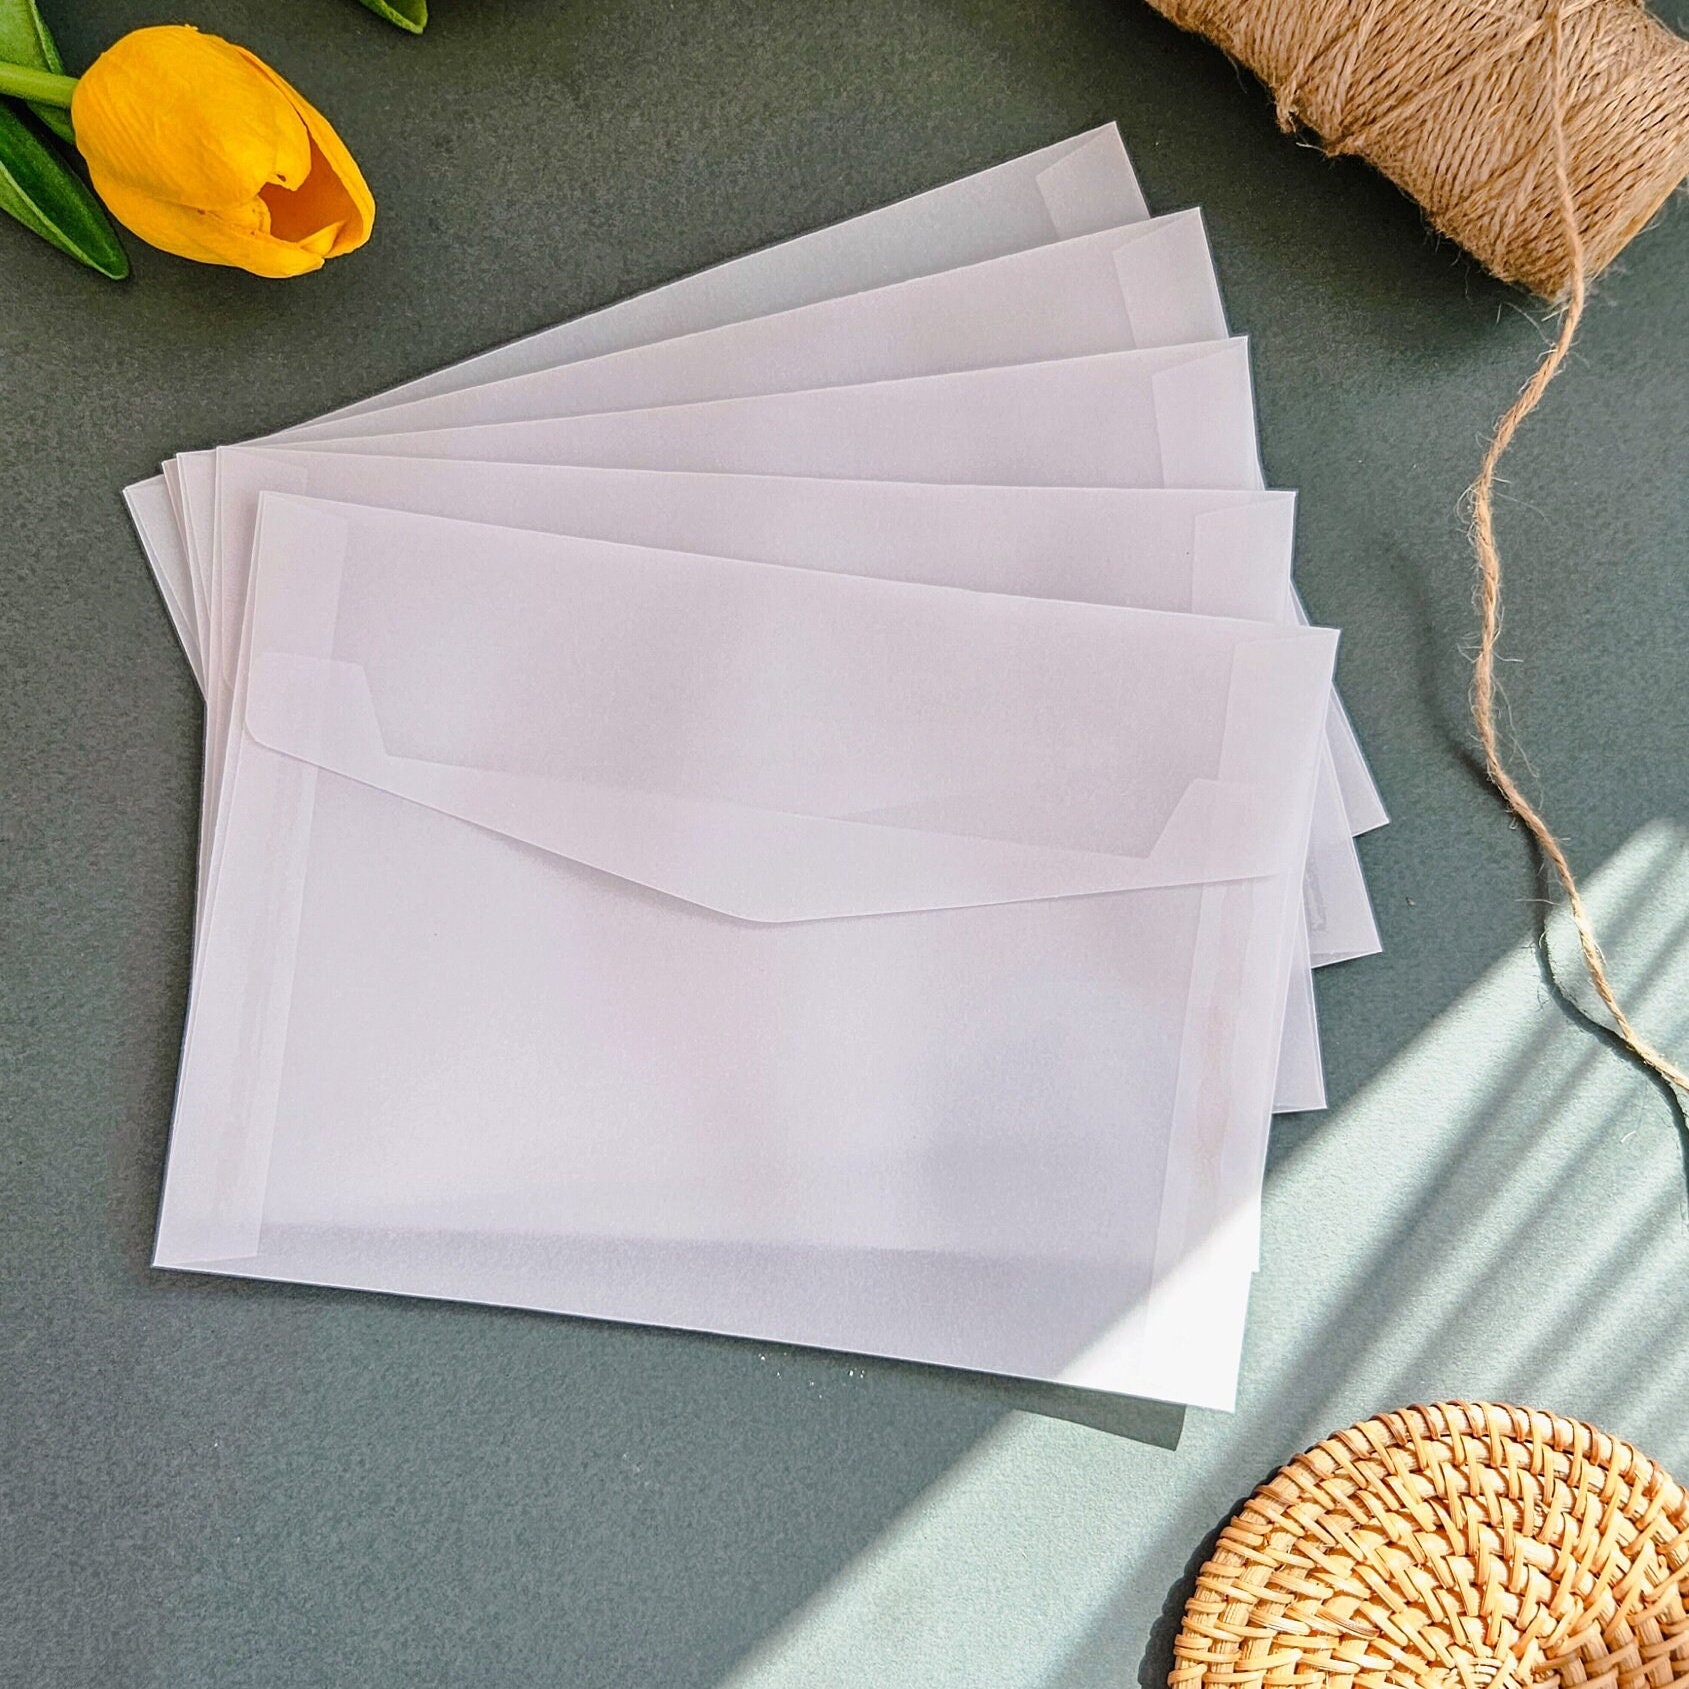 29 Lb. Vellum Paper Translucent / Transparent / Clear / Frosted Paper 8.5 X  11 Printable Sheets 112 GSM 29 